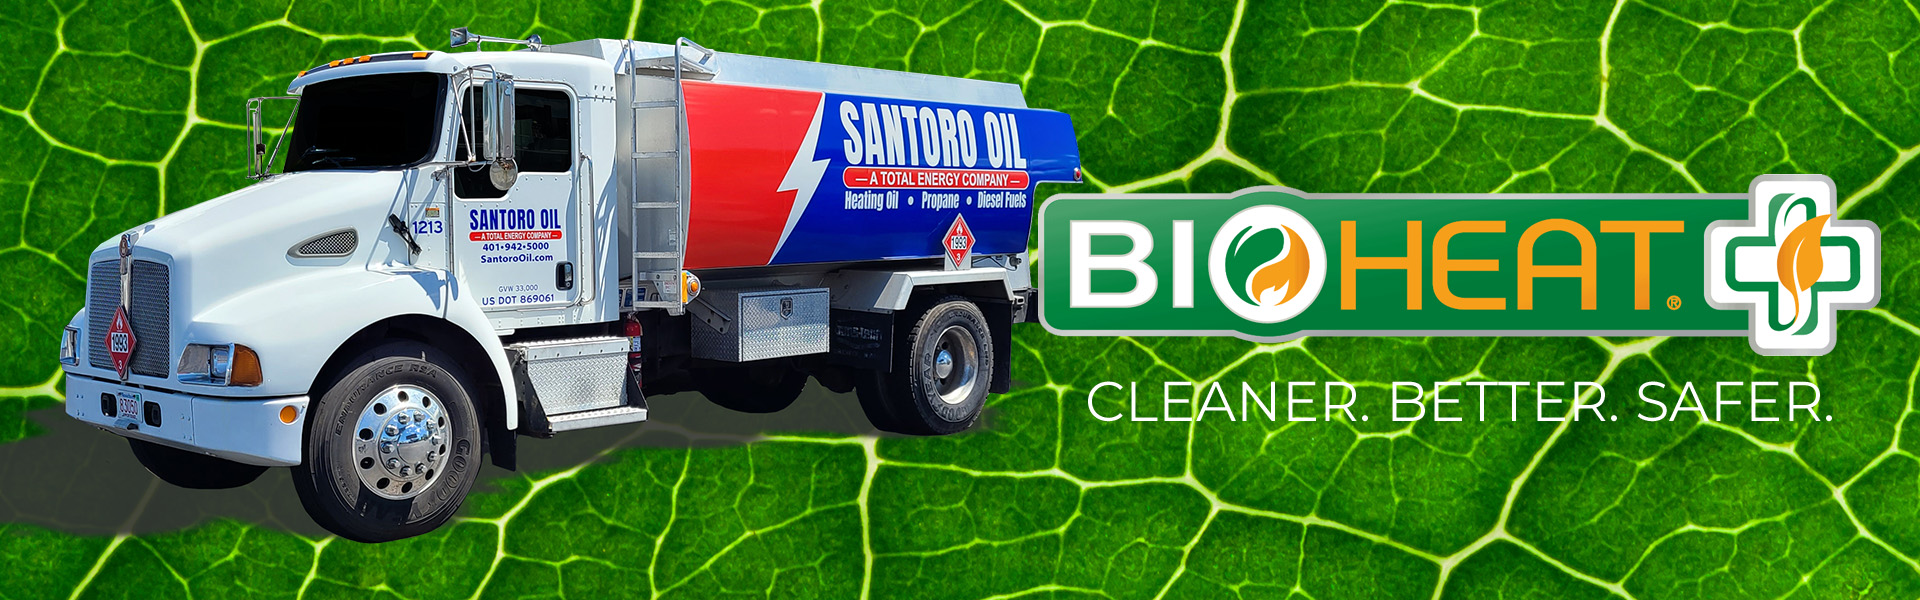 Santoro Oil delivering bioHeat blended Heating Oil to homeowners in MA